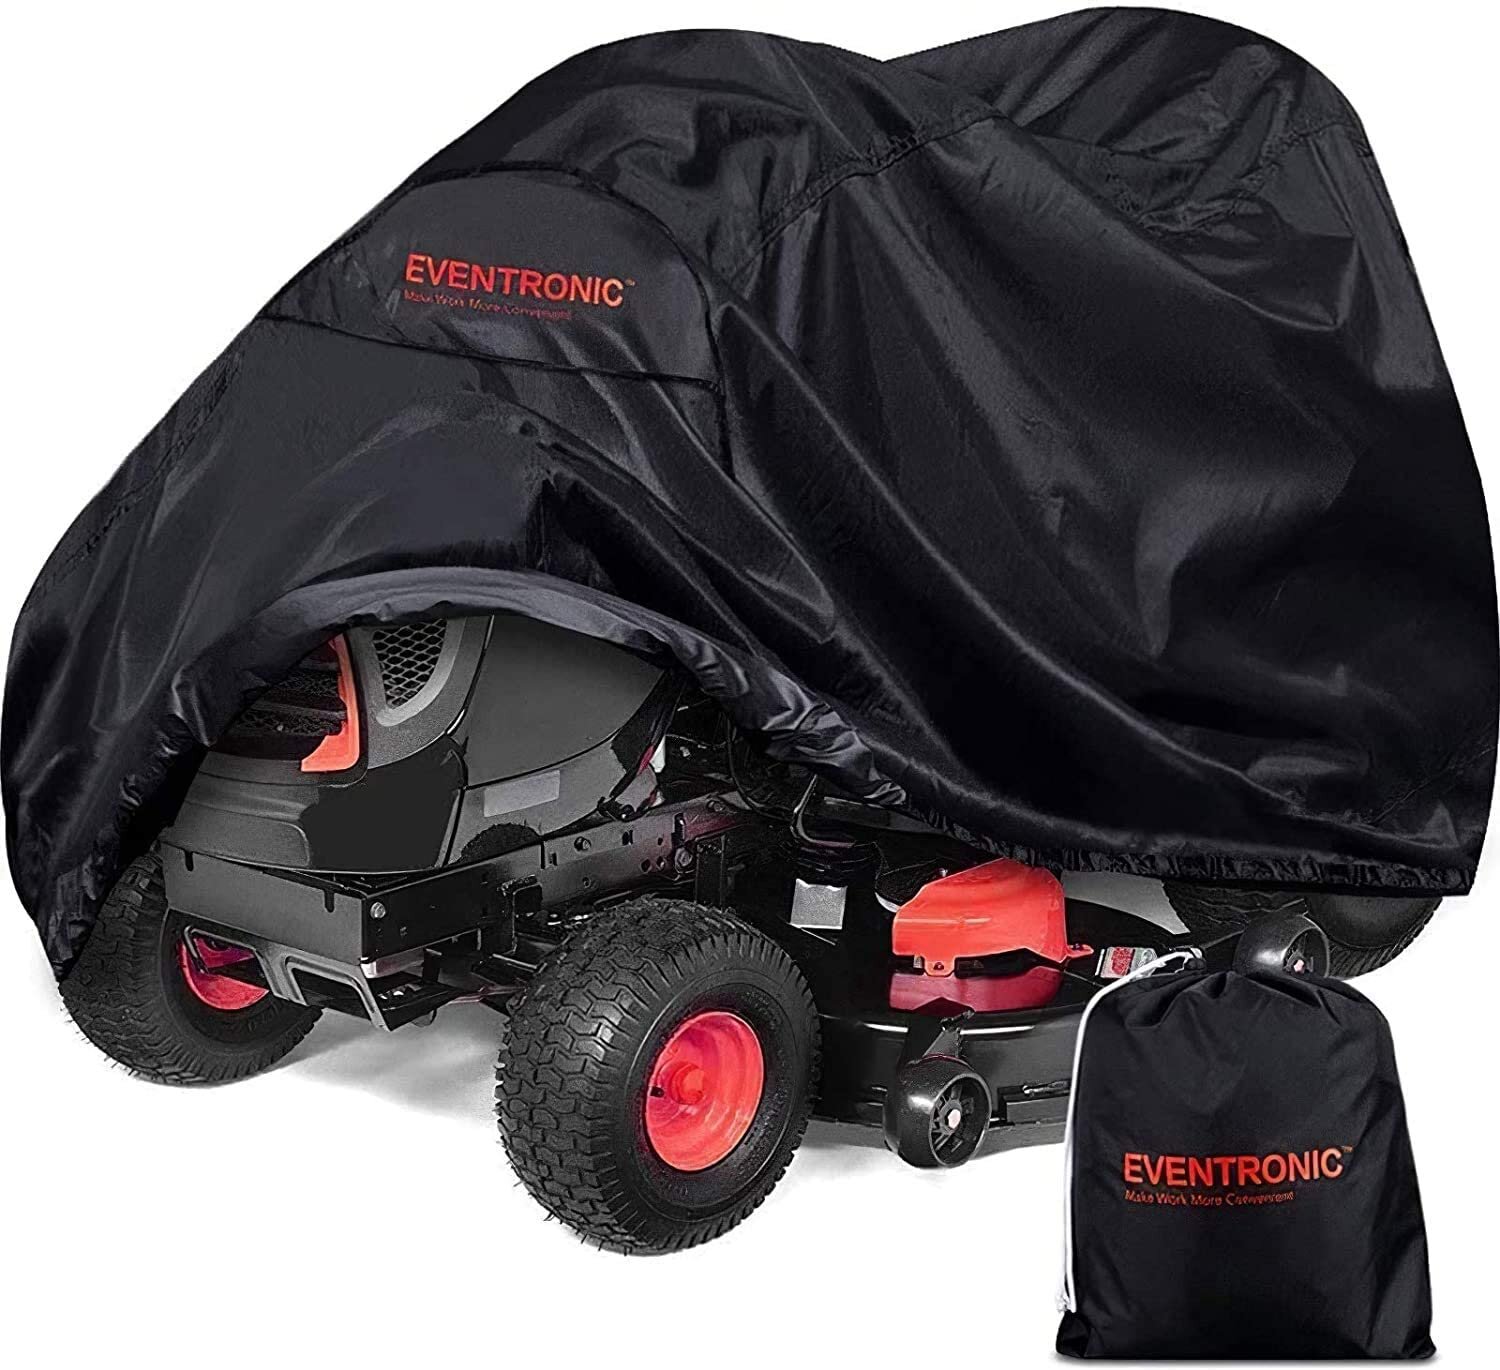 Durable Riding Lawn Mower Tractor Cover  Waterproof Garden Fit Decks up to 55"